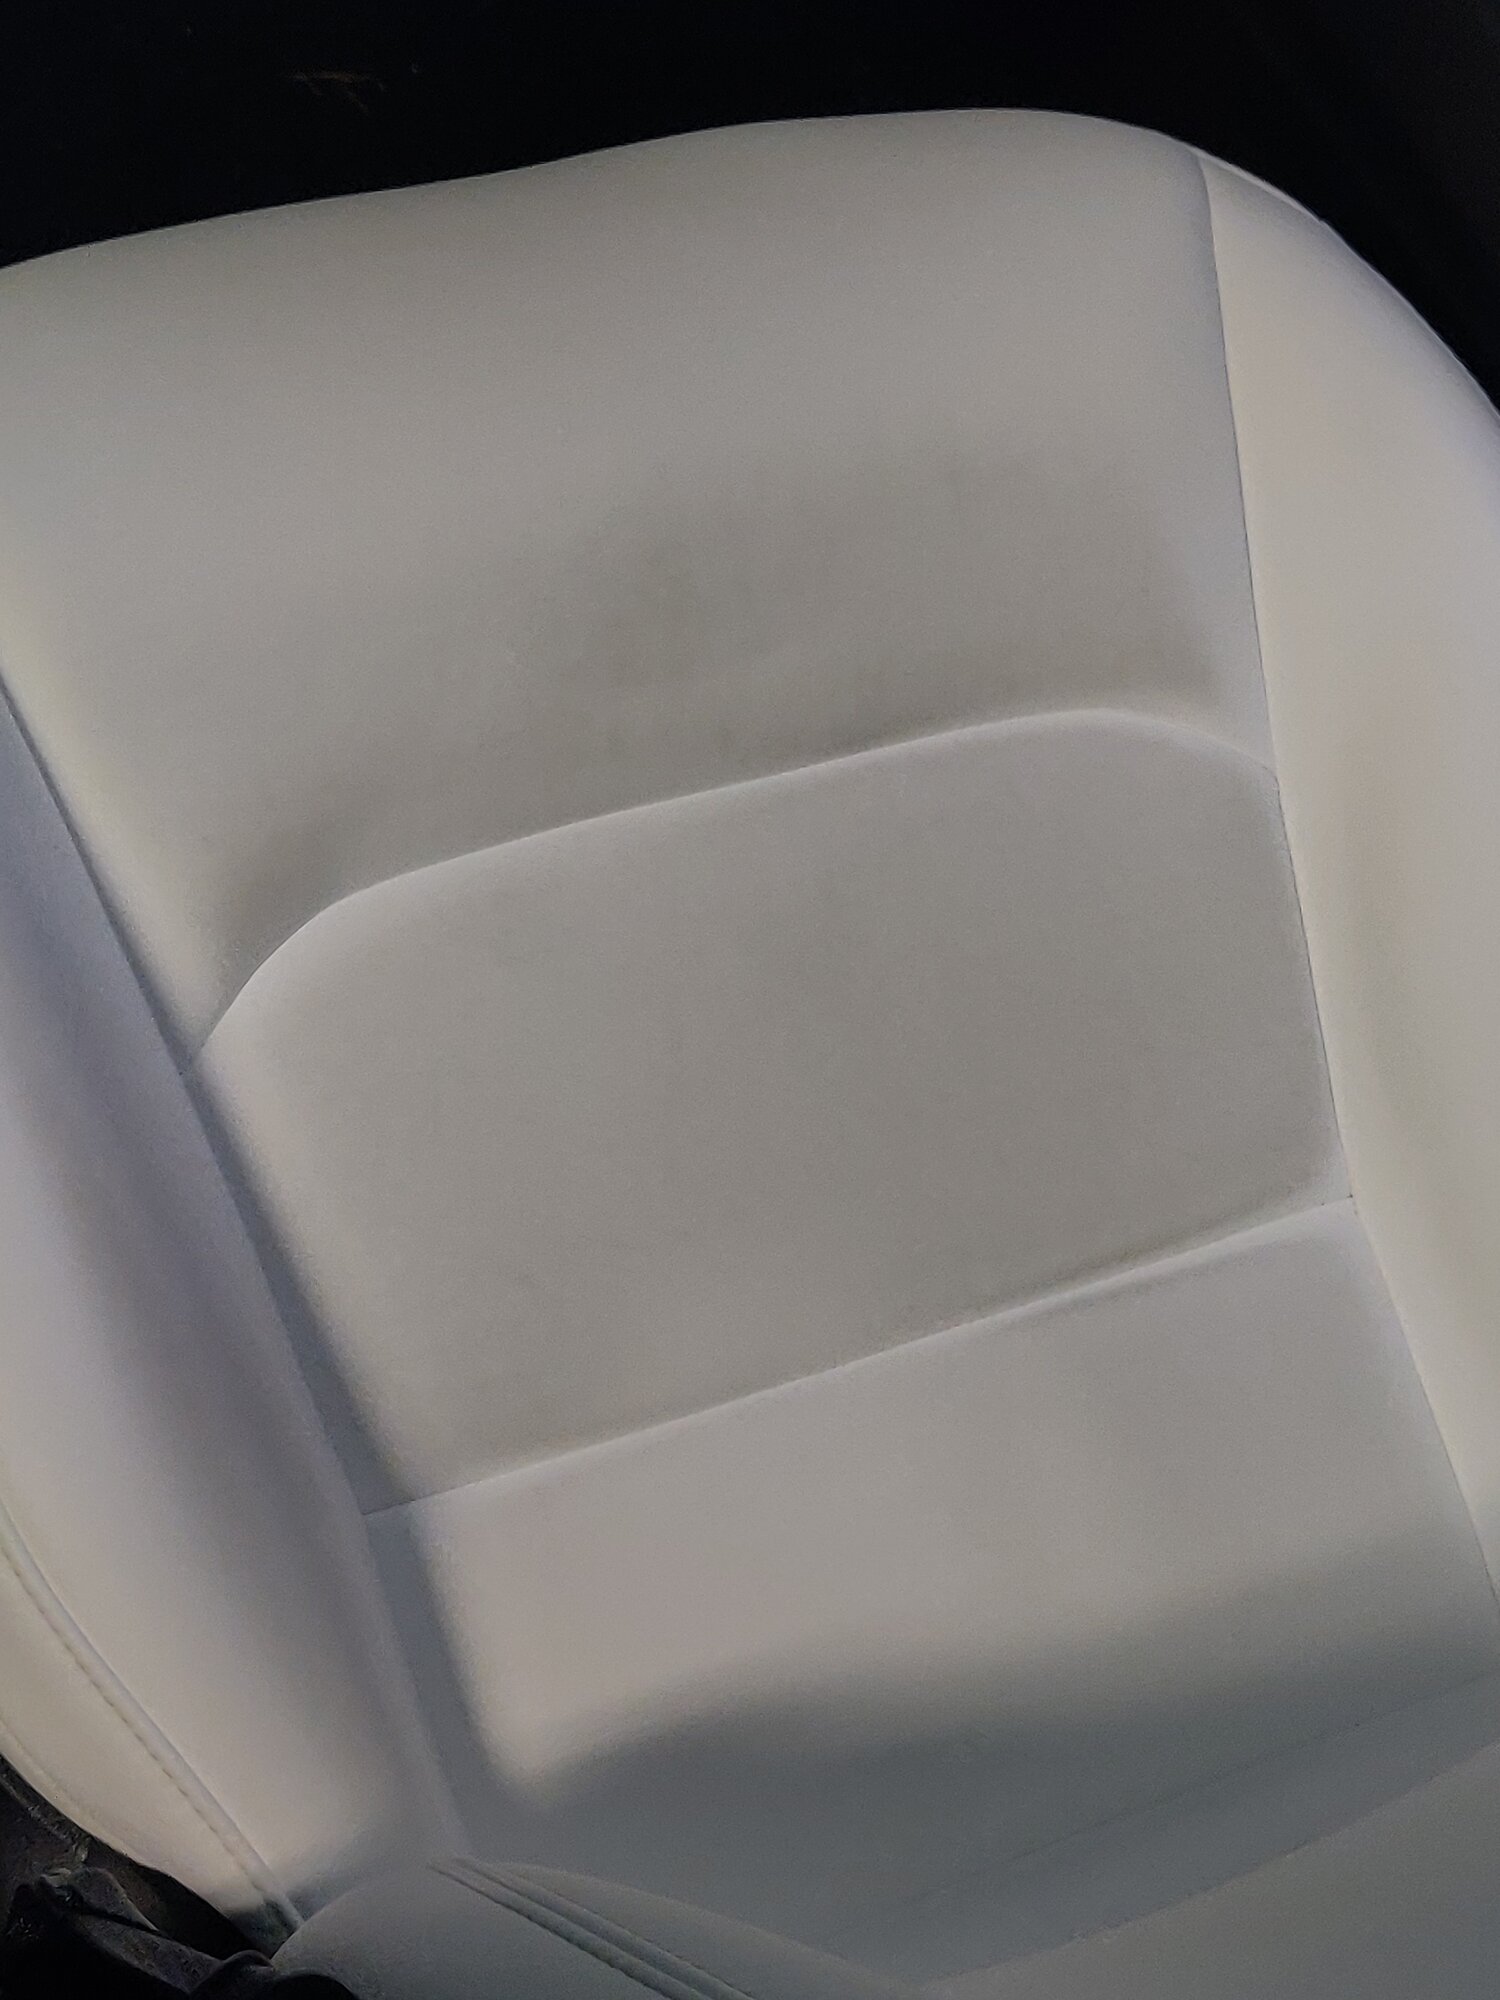 Cleaning / removing sunscreen sunscreen and white marks / stains off vegan  leather black seats?